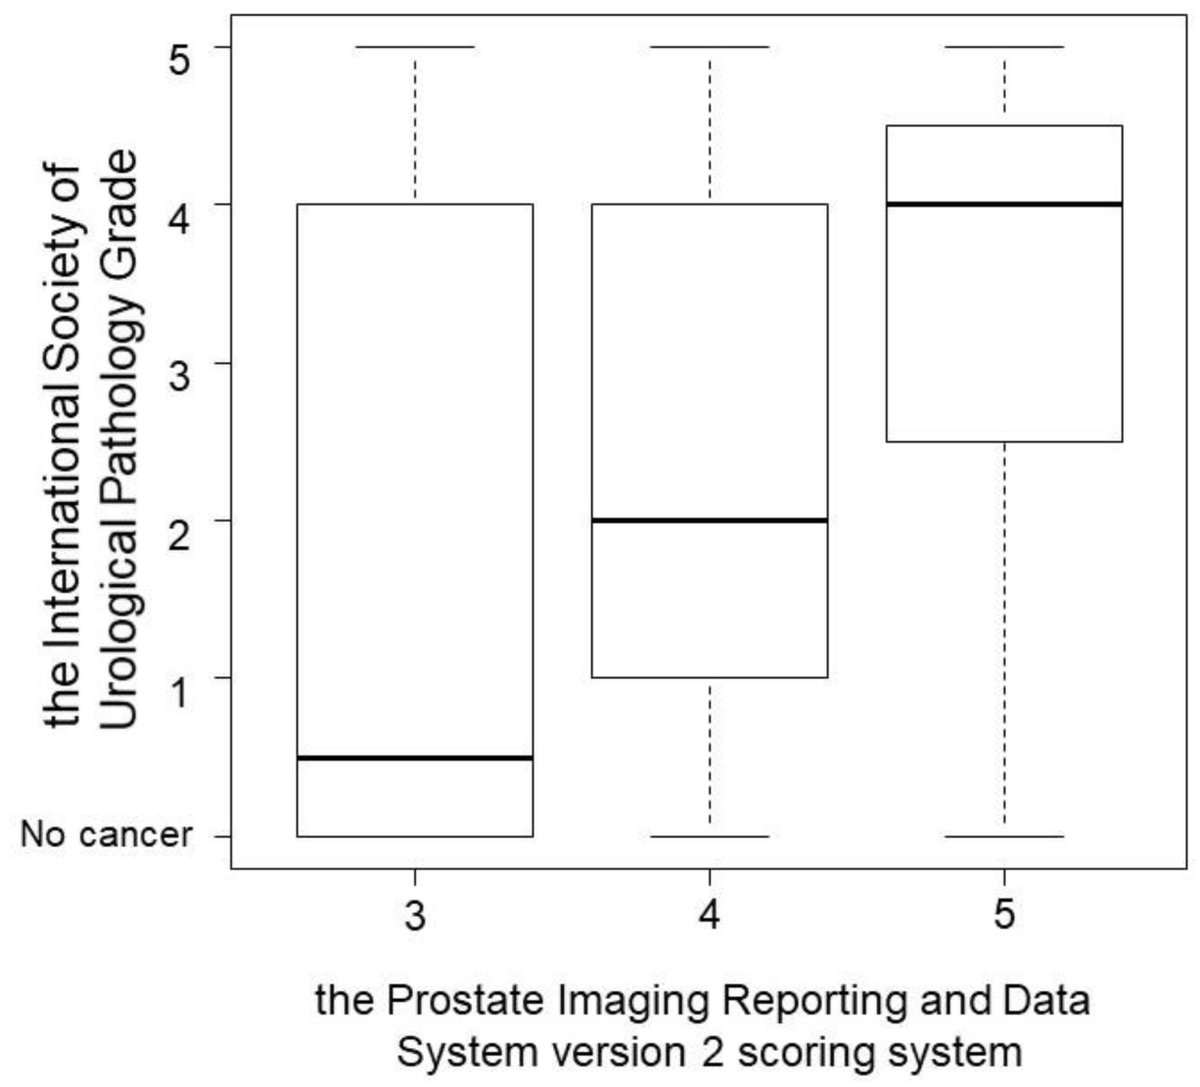 🔝 #HighlyCitedPaper The Utility of Combined Target and Systematic Prostate Biopsies in the Diagnosis of Clinically Significant Prostate Cancer Using Prostate Imaging Reporting and Data System Version 2 Based on Biparametric Magnetic Resonance Imaging brnw.ch/21wJzeB